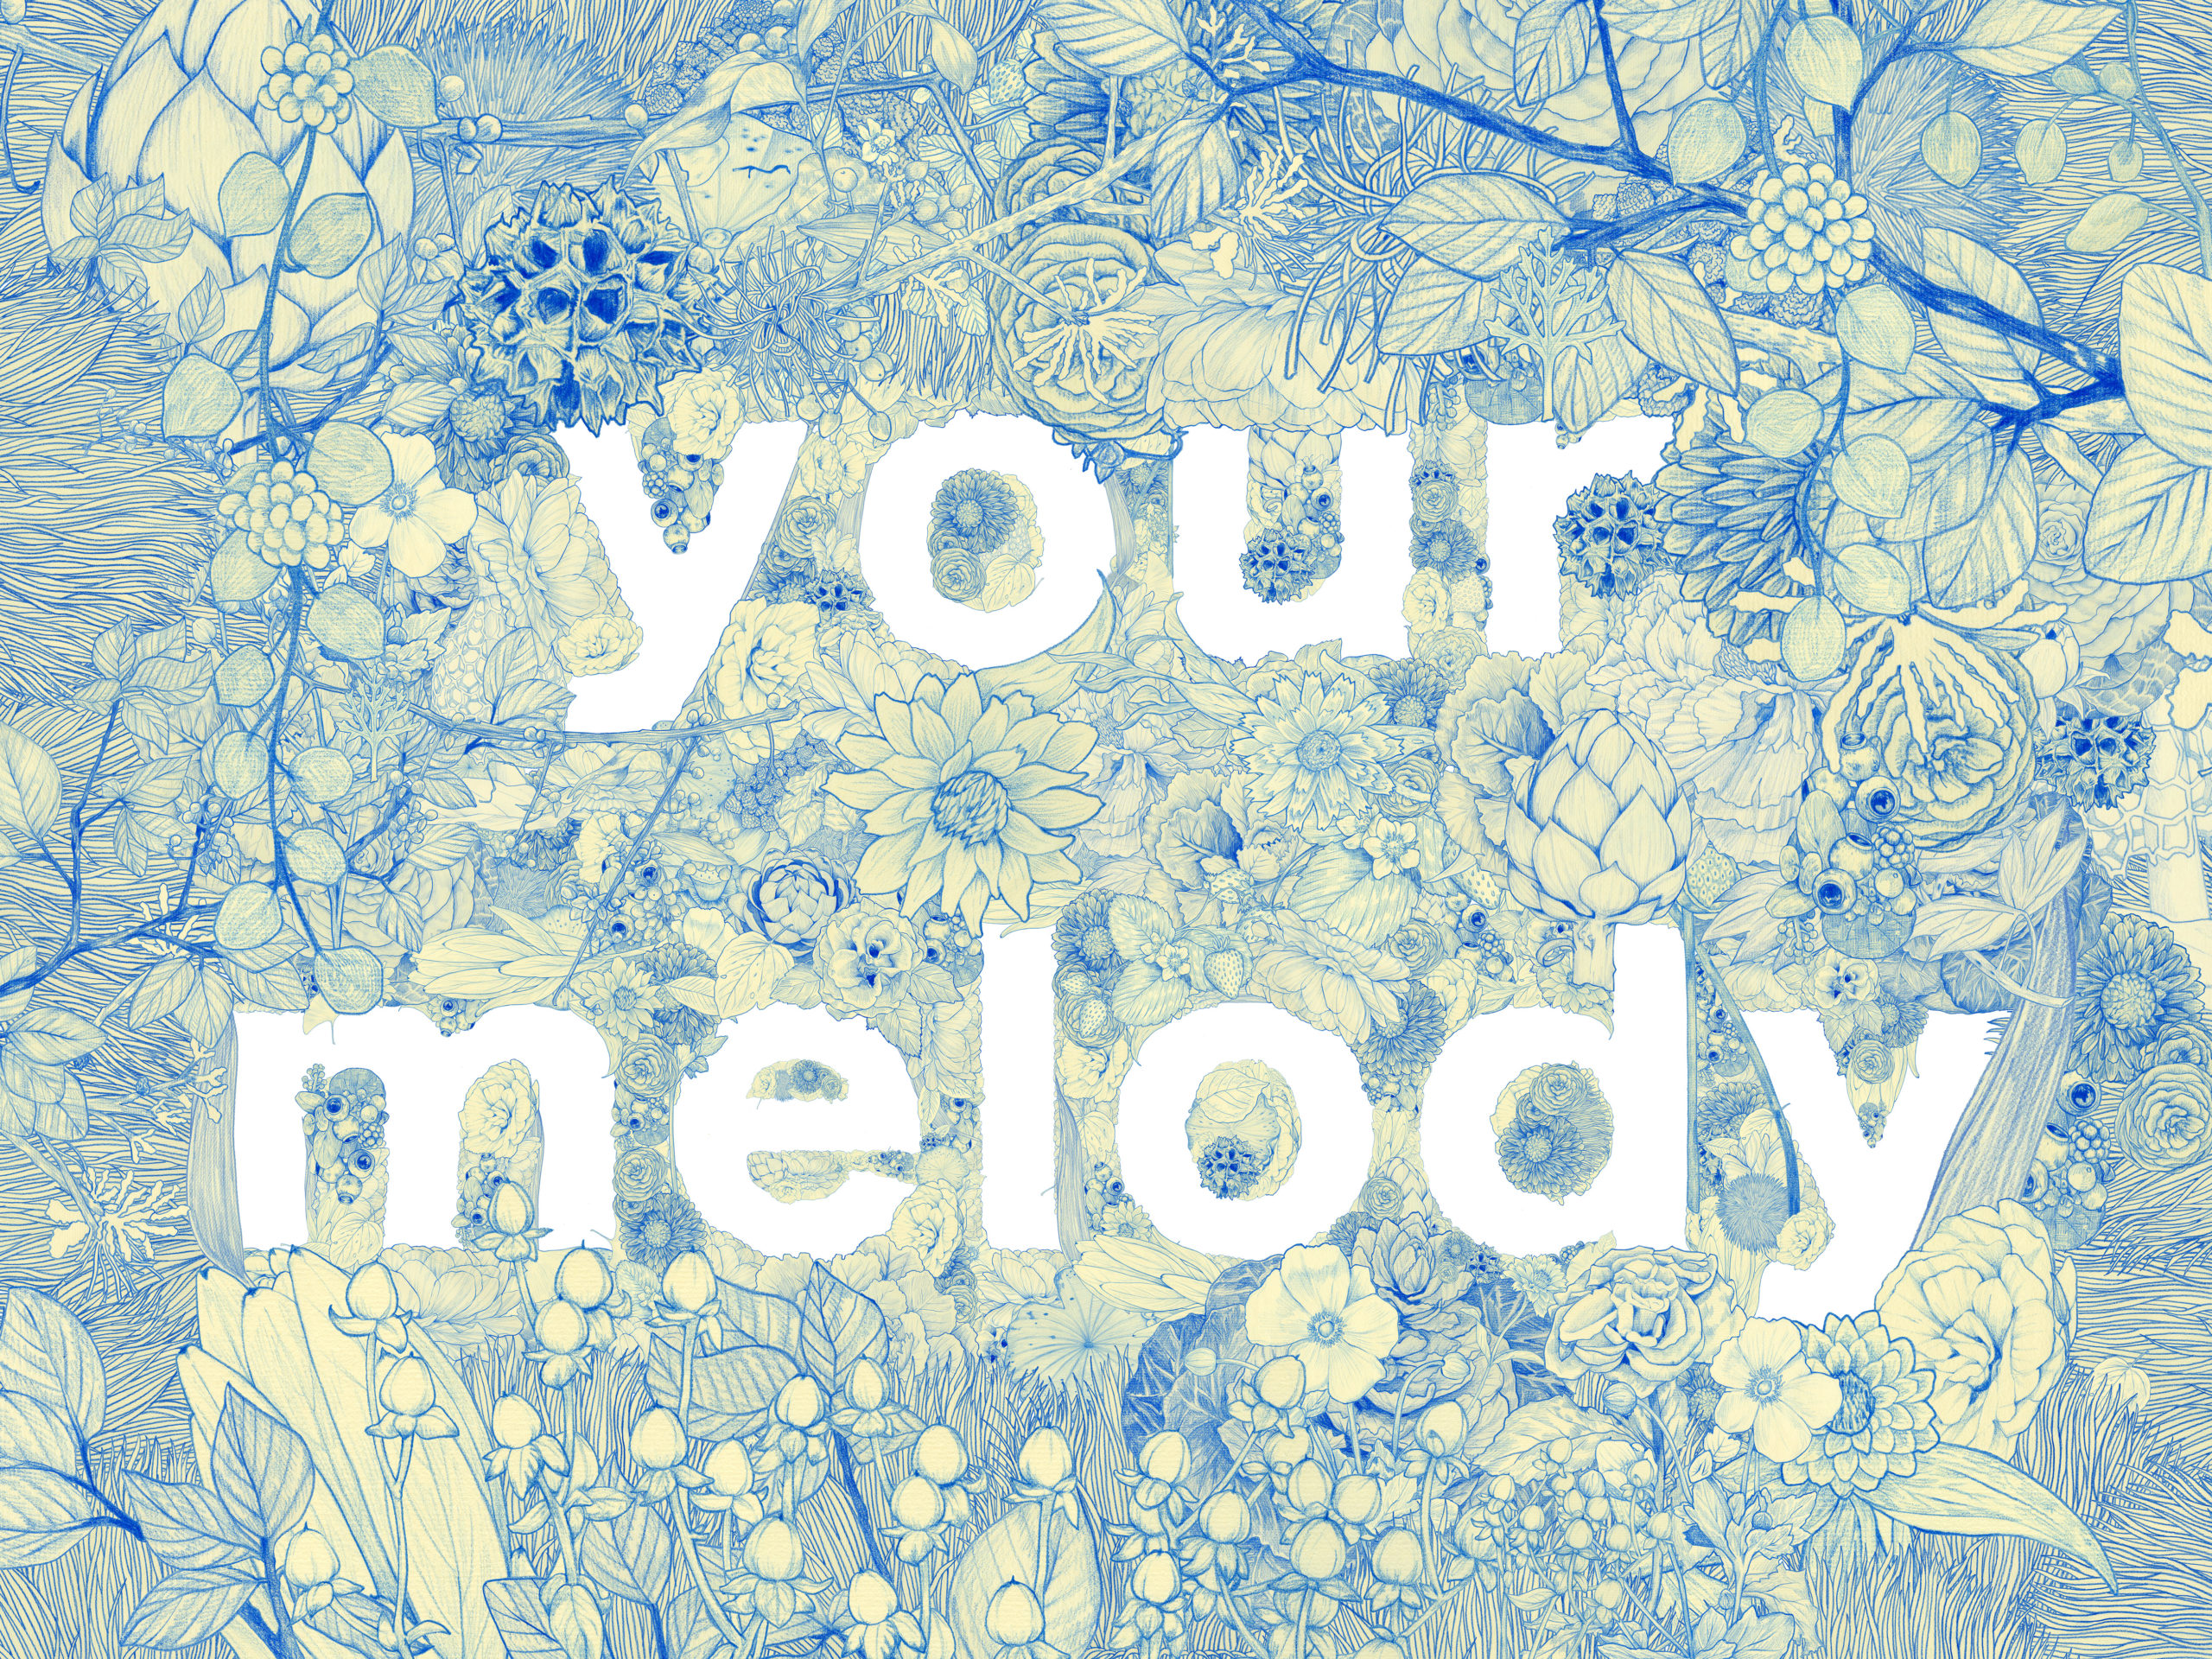 your melody ; あなたのための旋律／ 530✖️410mm／for solo show『Harmony ／my melody , your melody』at hpgrp gallery Tokyo Aoyama